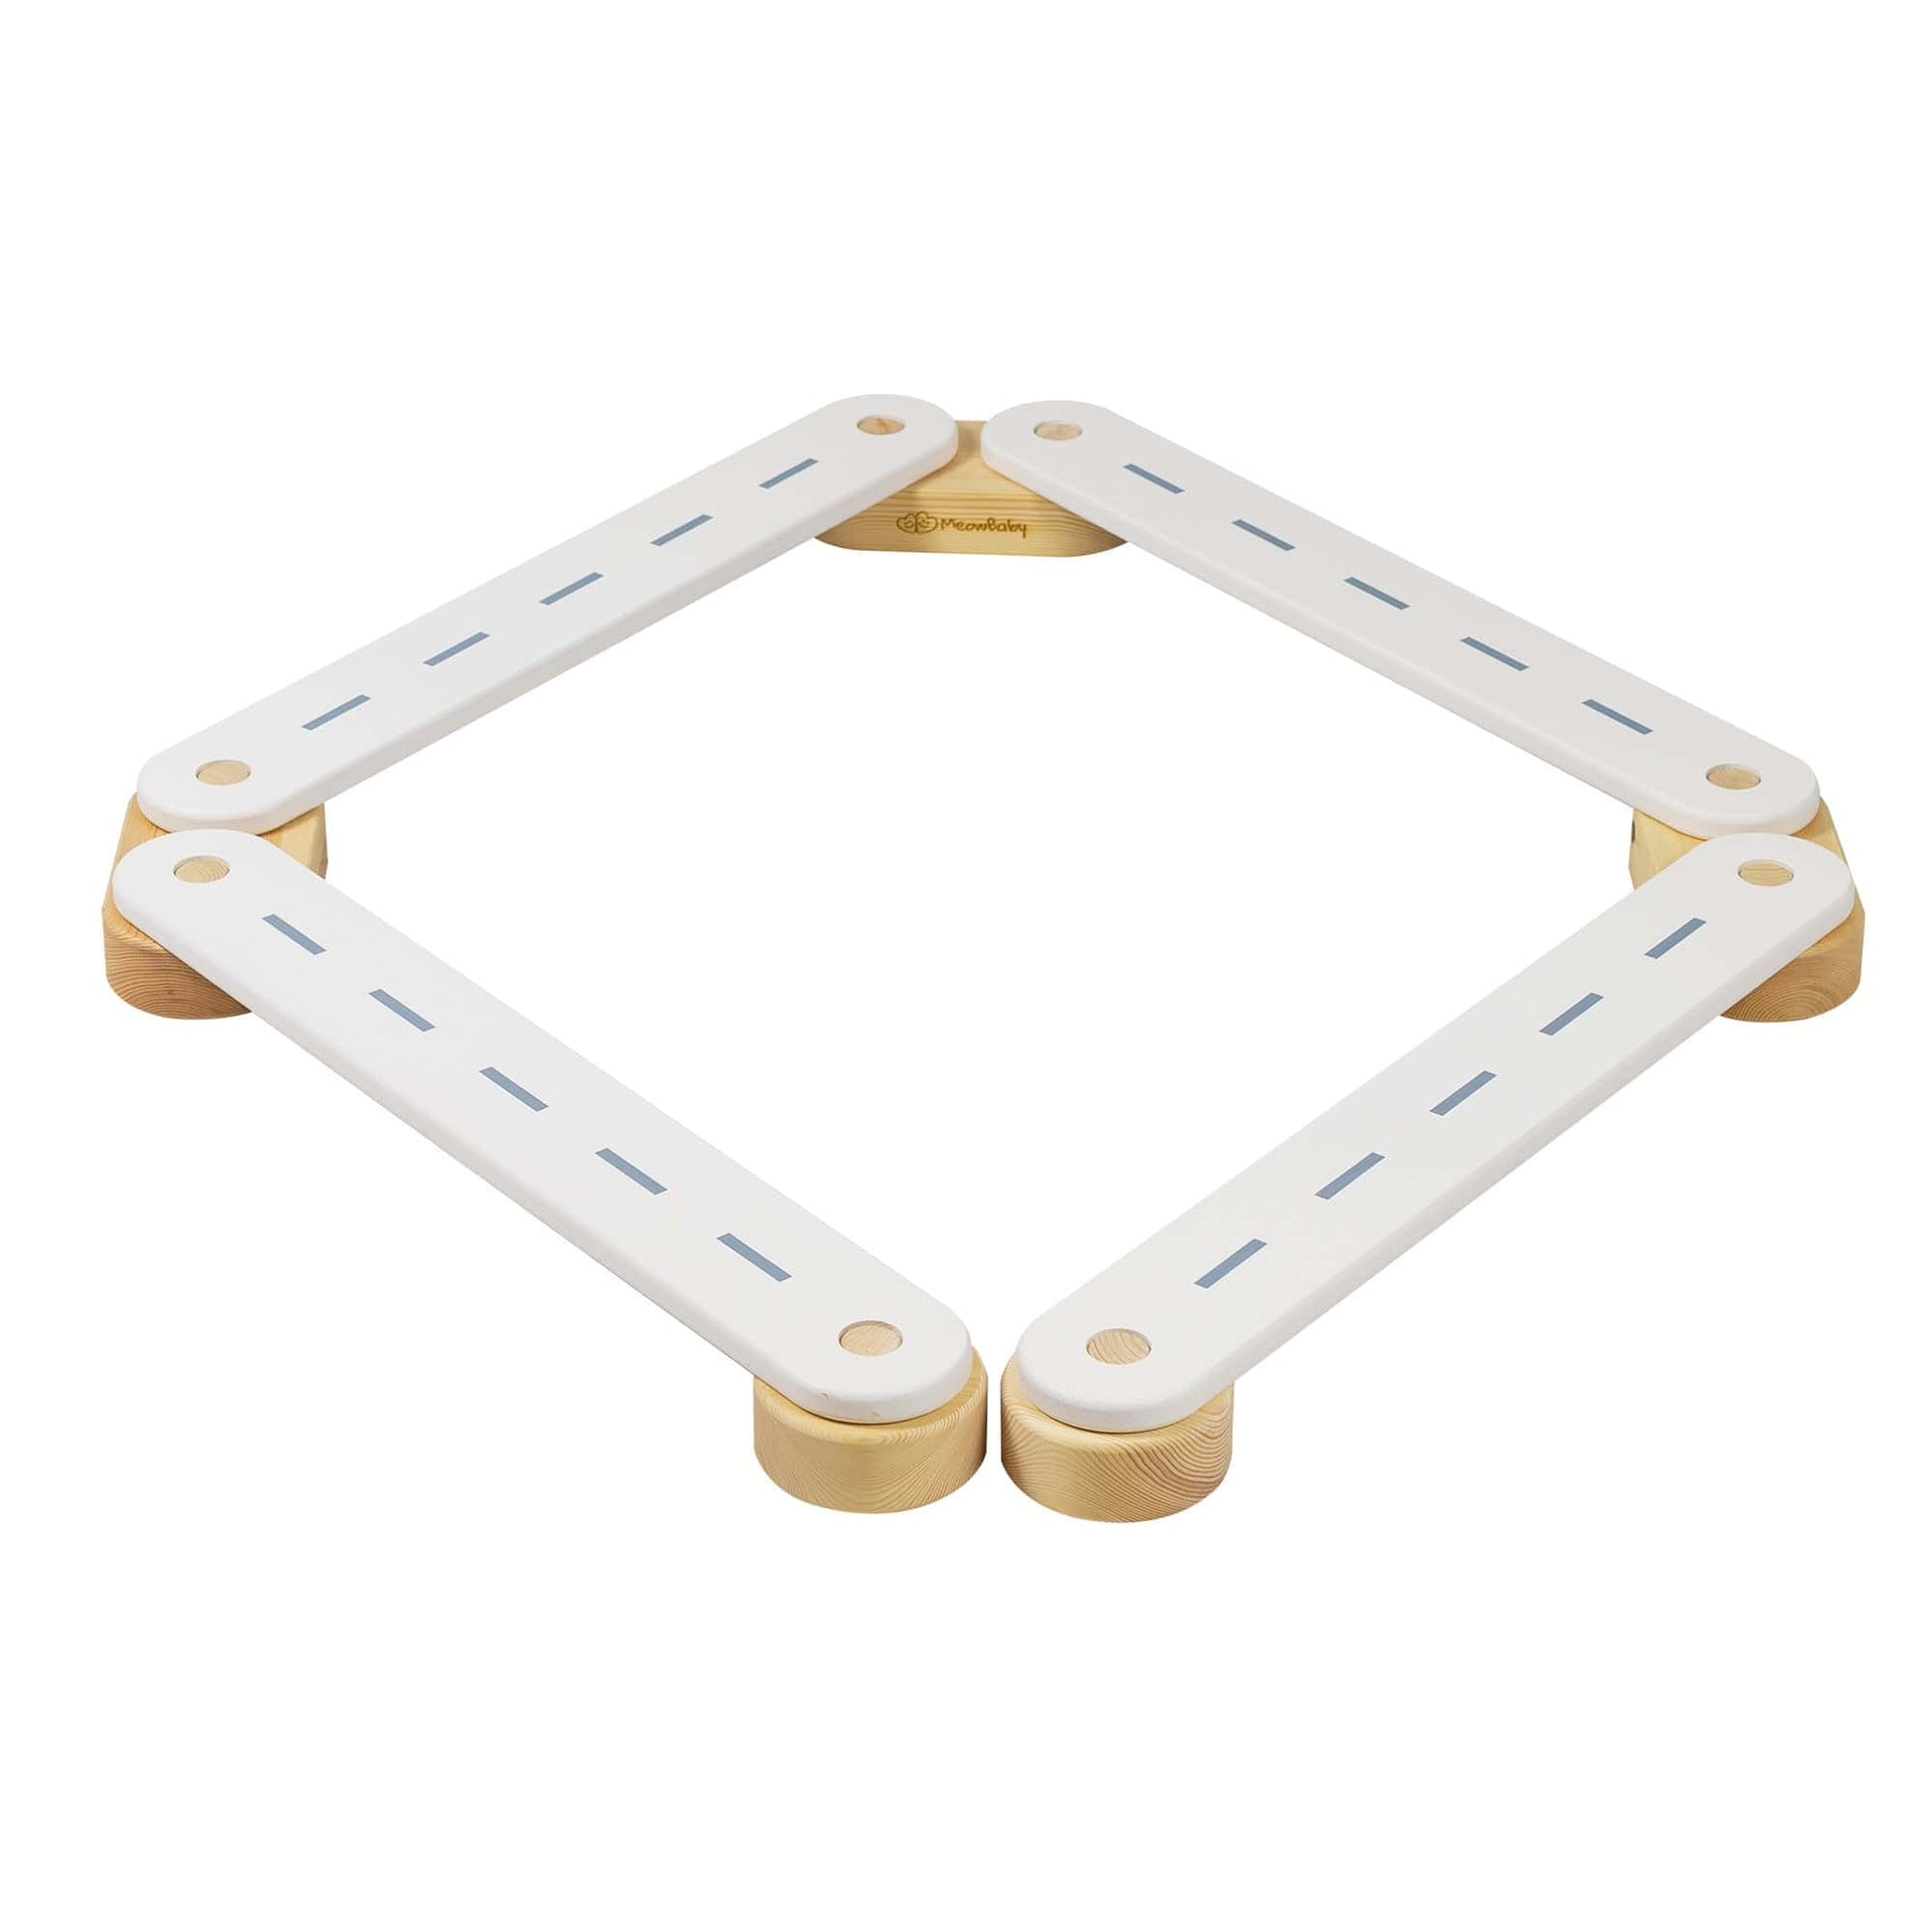 Wooden Balance Bream For Kids By Meowbaby - 4 Elements White